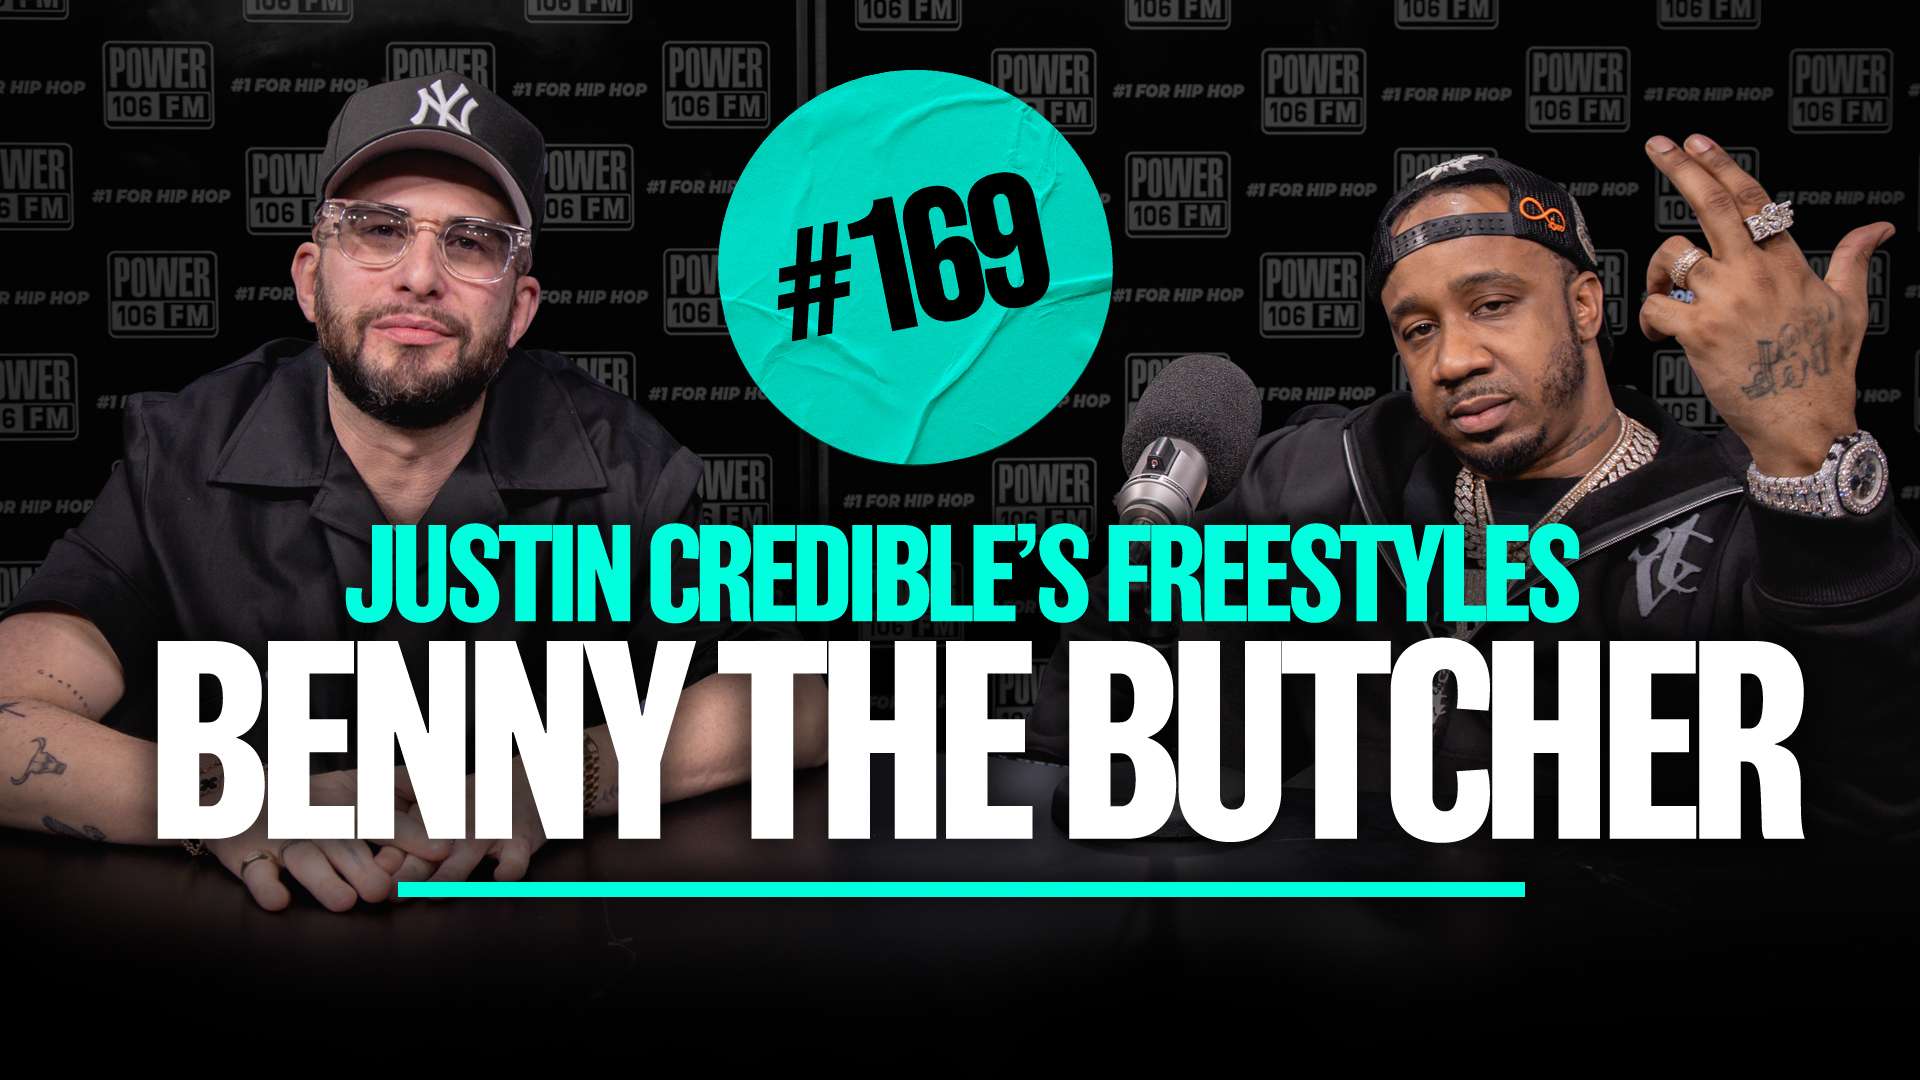 Benny The Butcher Freestyles Over Mobb Deep’s “The Realest”